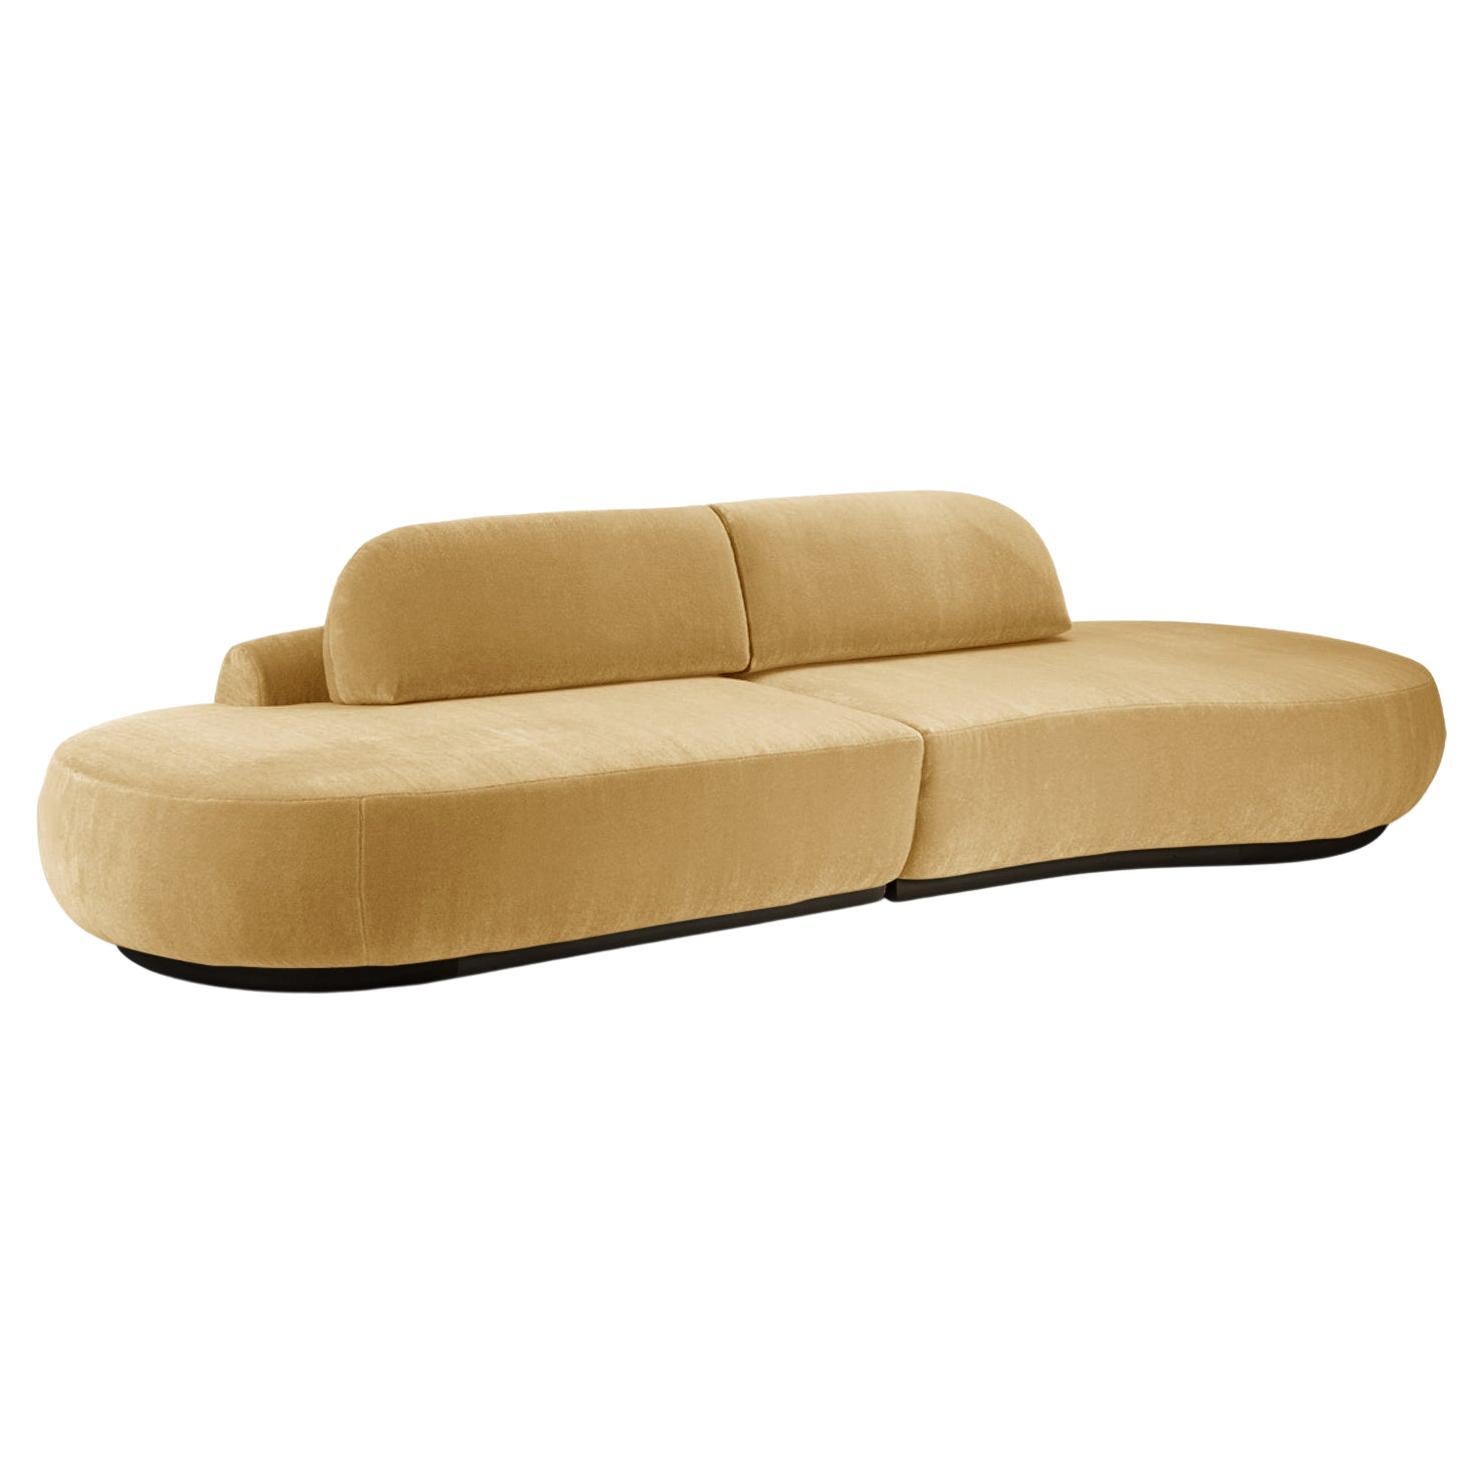 Naked Curved Sectional Sofa, 2 Piece with Beech Ash-056-5 and Vigo Plantain For Sale